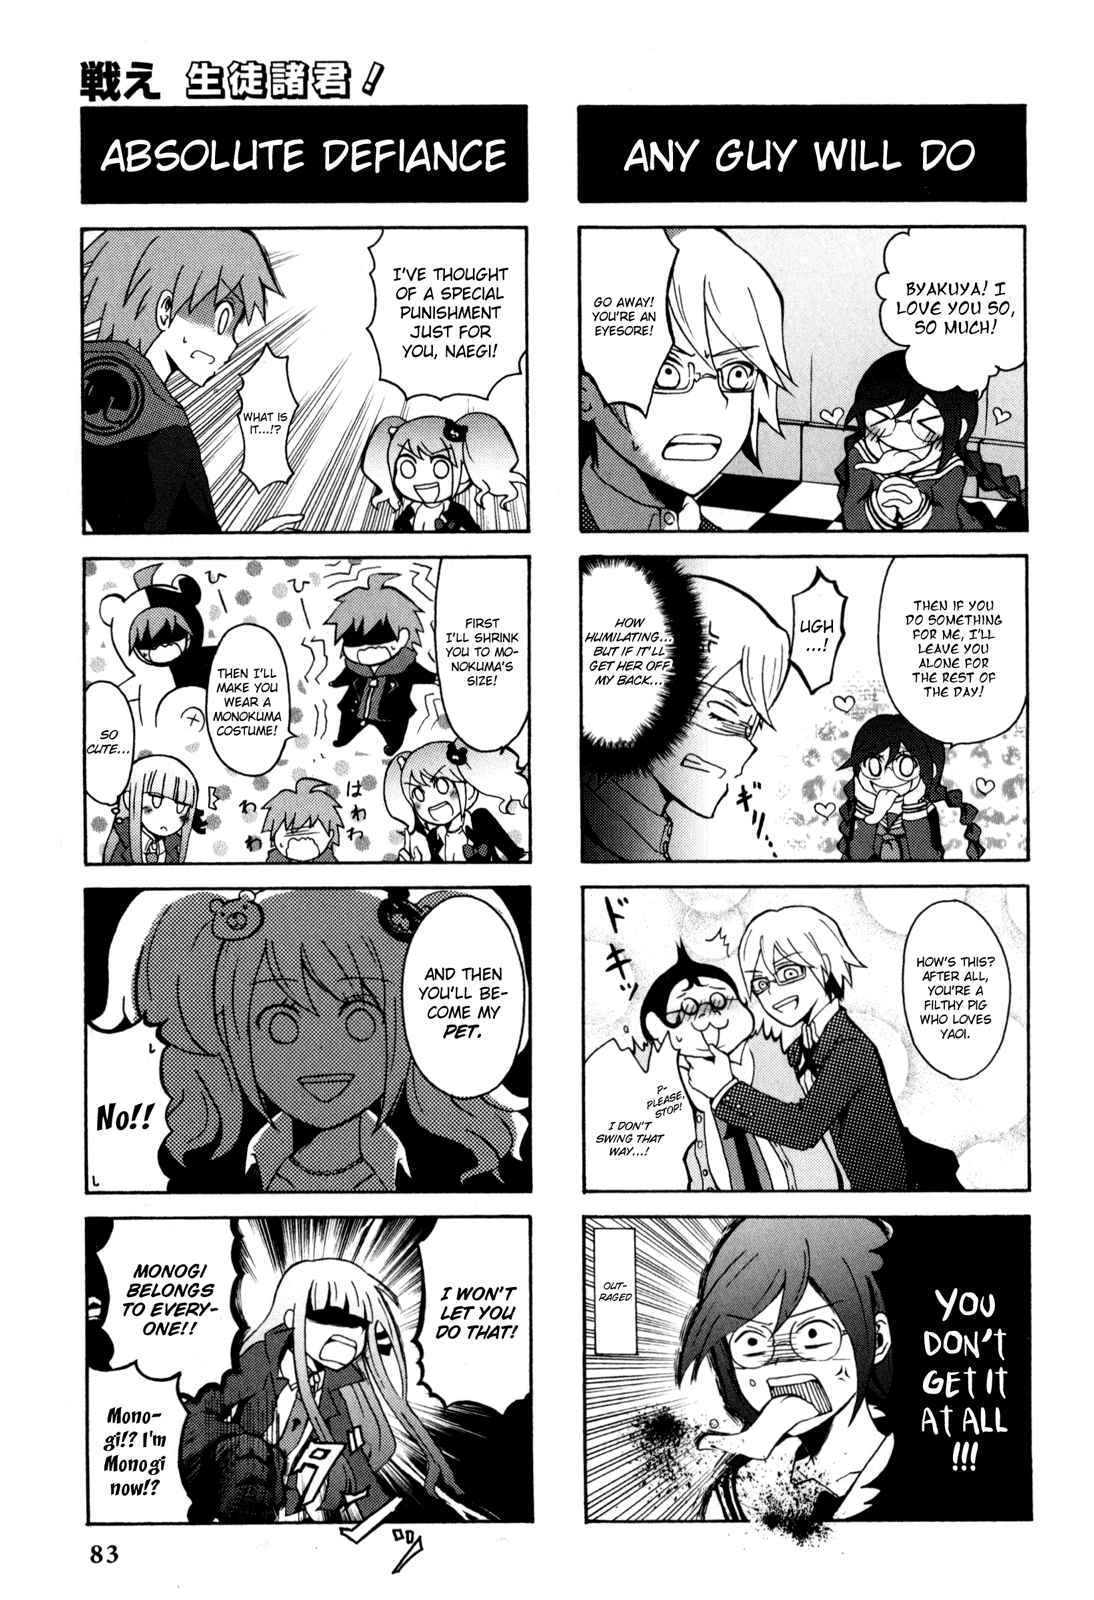 Danganronpa The Academy of Hope and the High School Students of Despair 4 koma Kings Vol. 2 Ch. 13 Fight, Students! by Nimoyashi